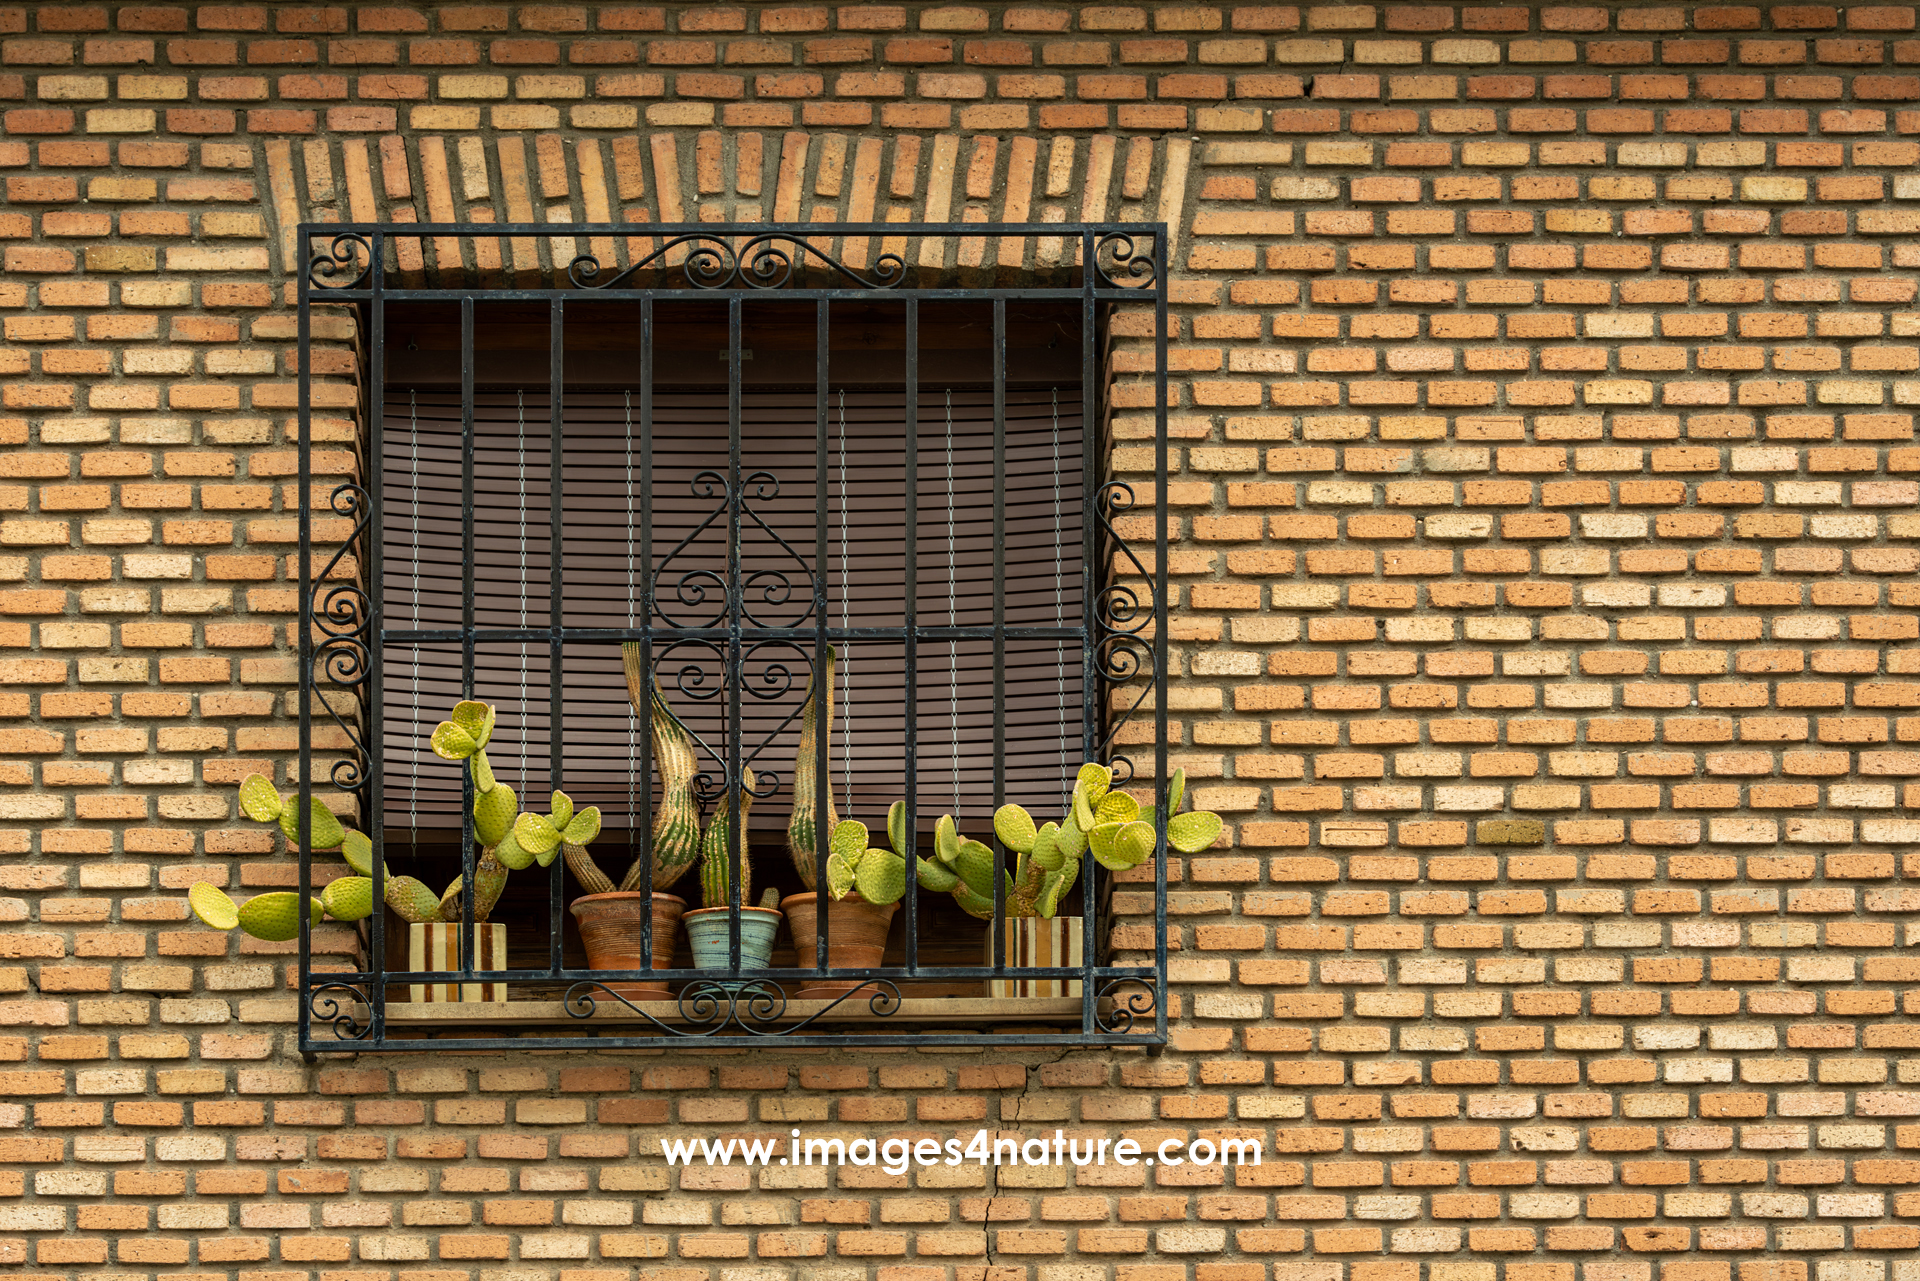 Window with metal bars and flower pots with cacti